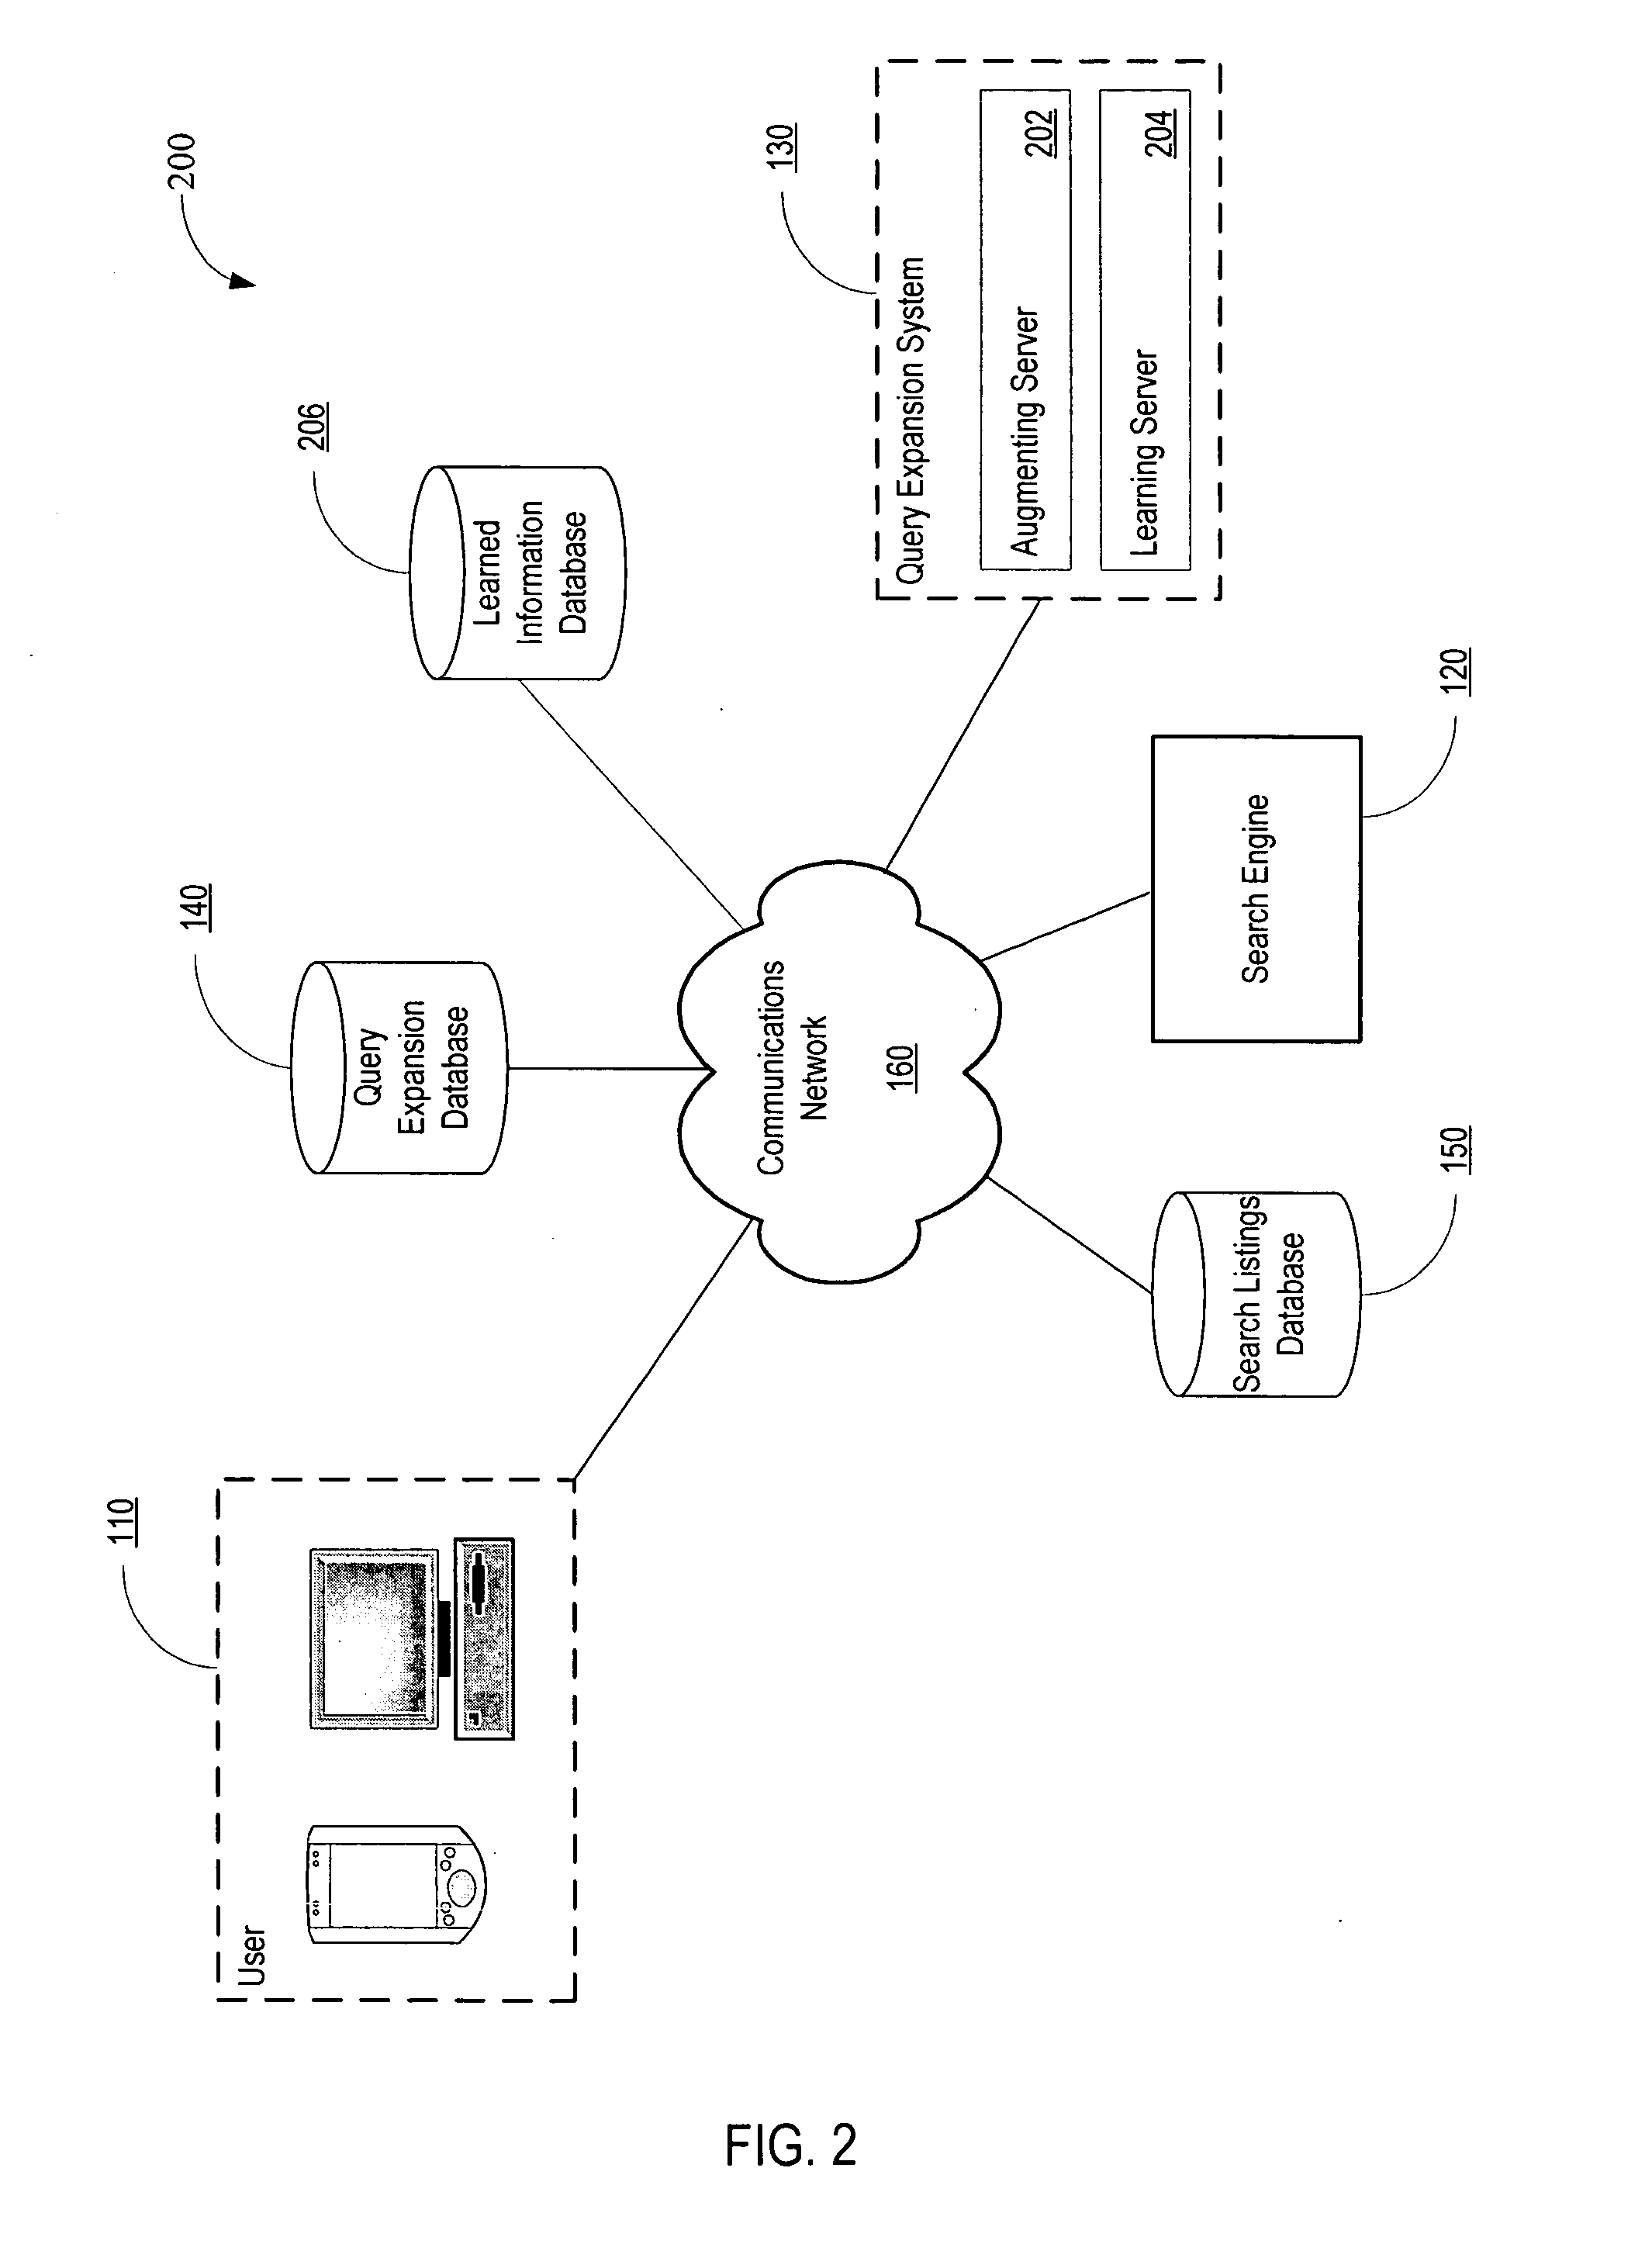 System and method for query expansion